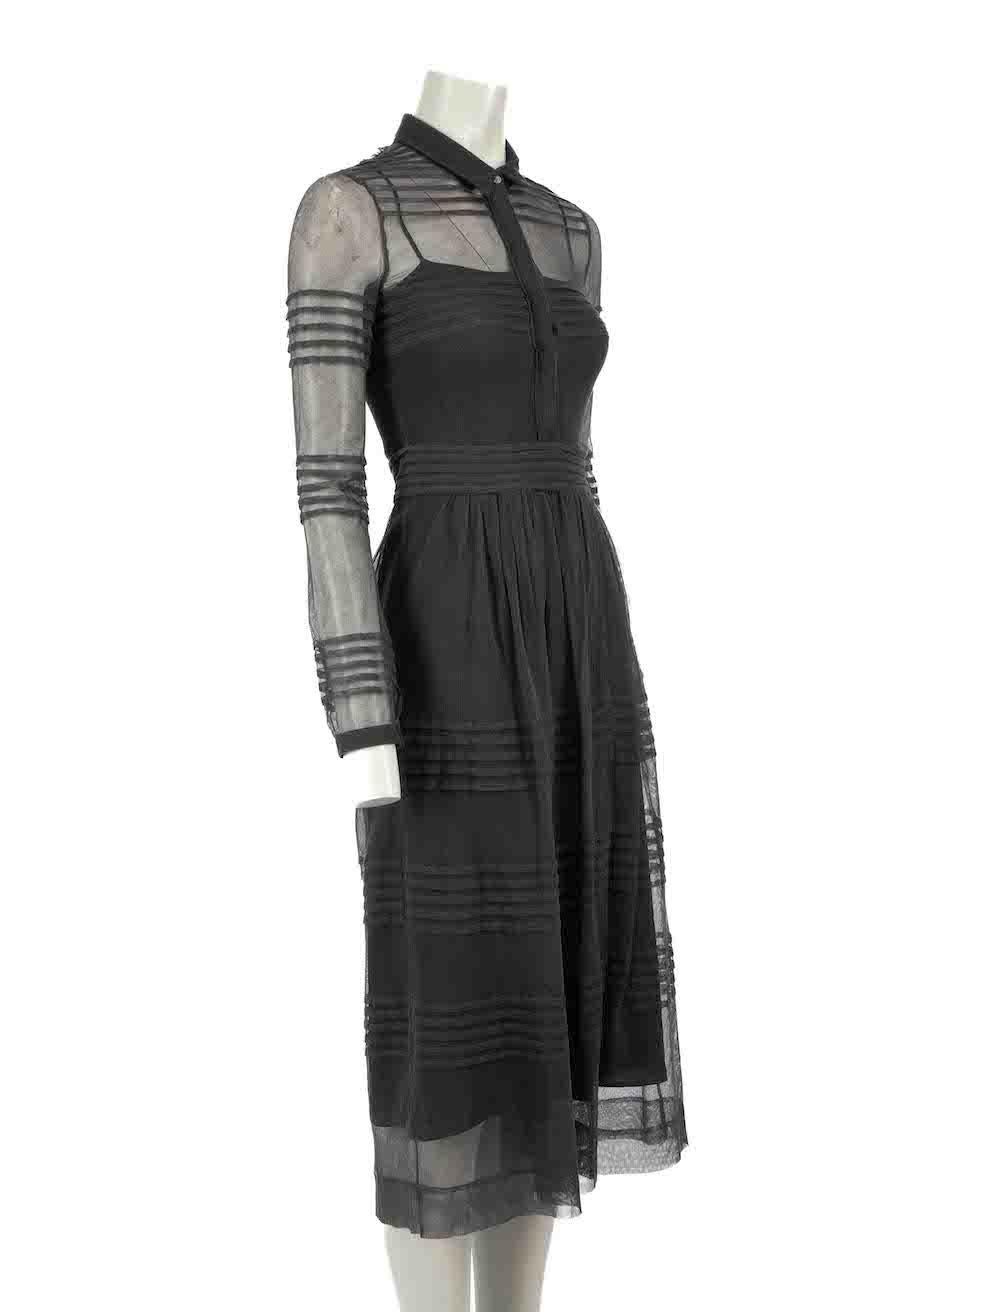 CONDITION is Very good. Hardly any visible wear to dress is evident on this used Burberry designer resale item.
 
Details
Grey
Viscose
Shirt dress
Round neck
Long sleeves
Sheer
Midi
Stripe pleated pattern
Frond button fastening
Side zip